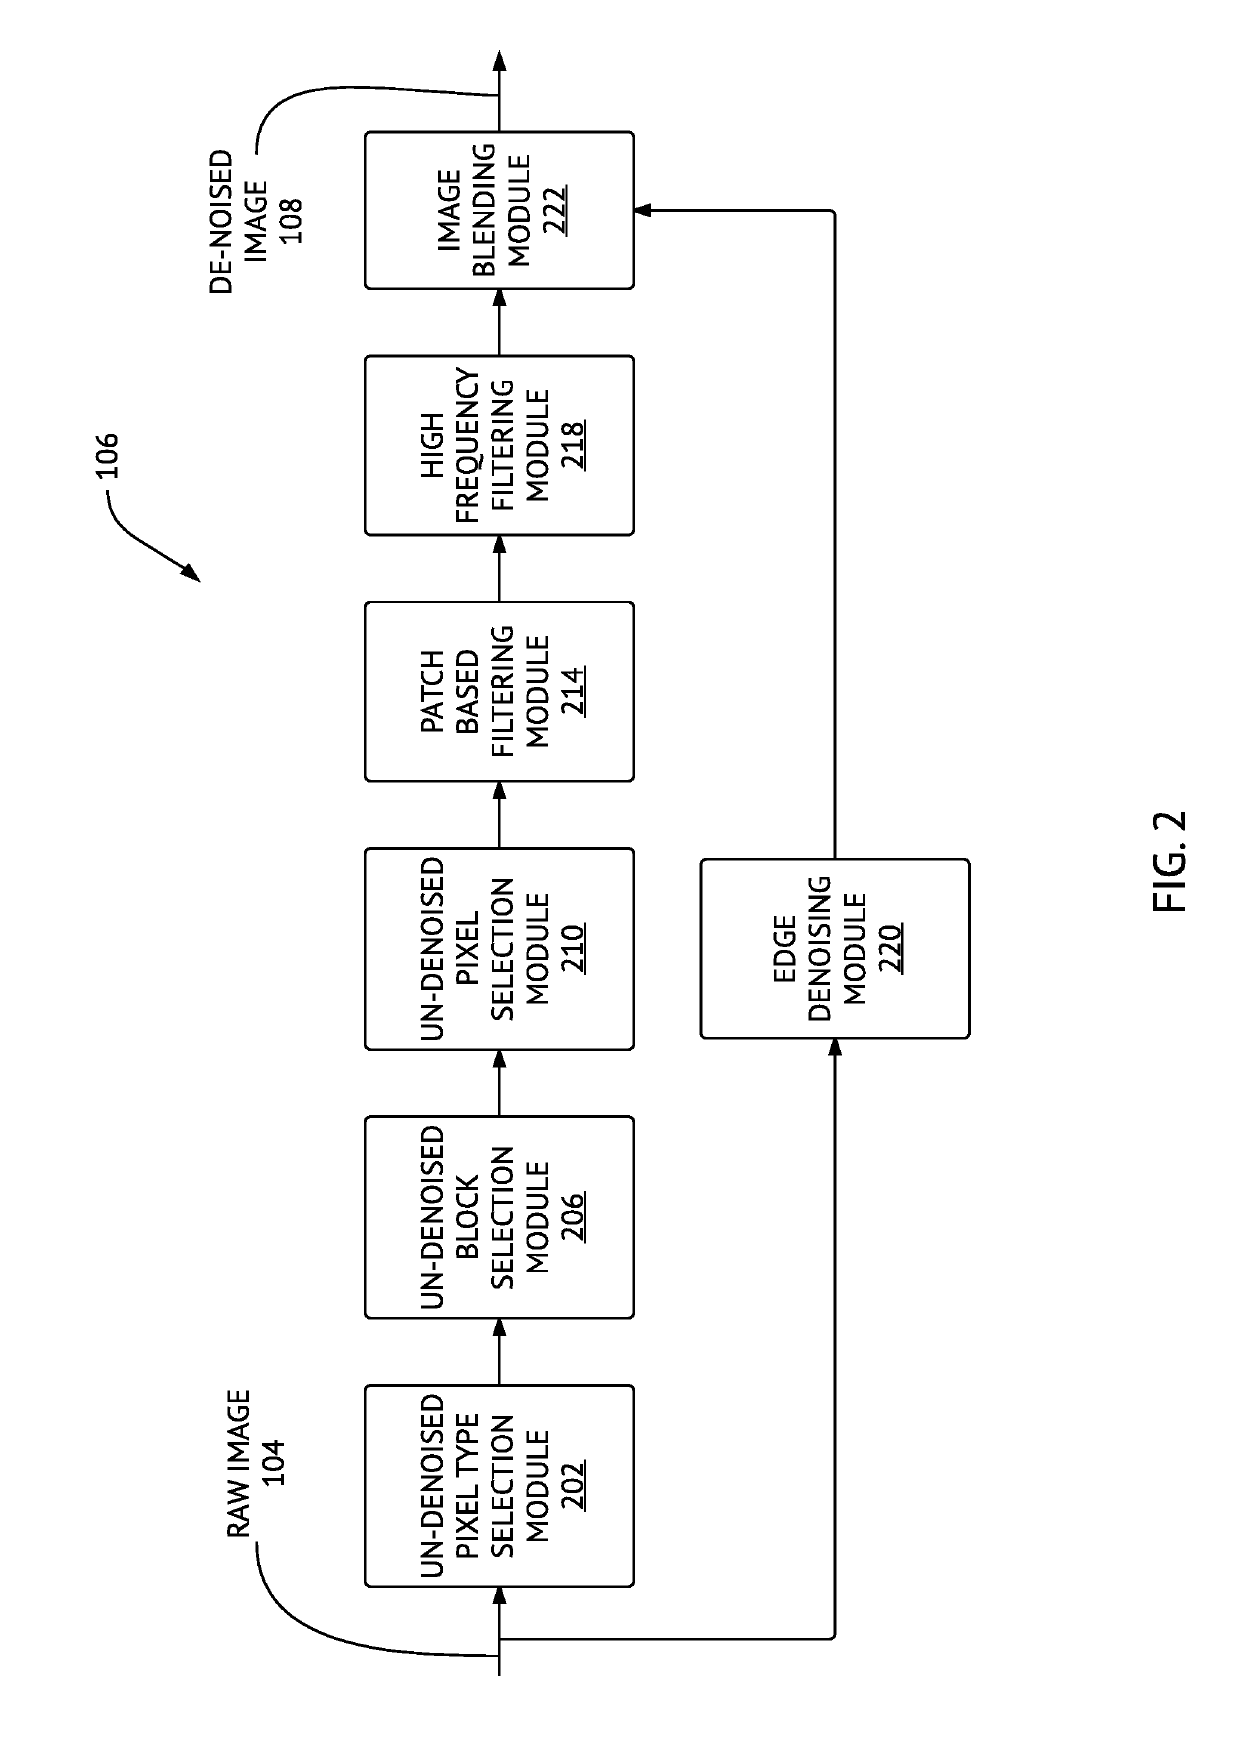 Method and system for edge denoising of a digital image